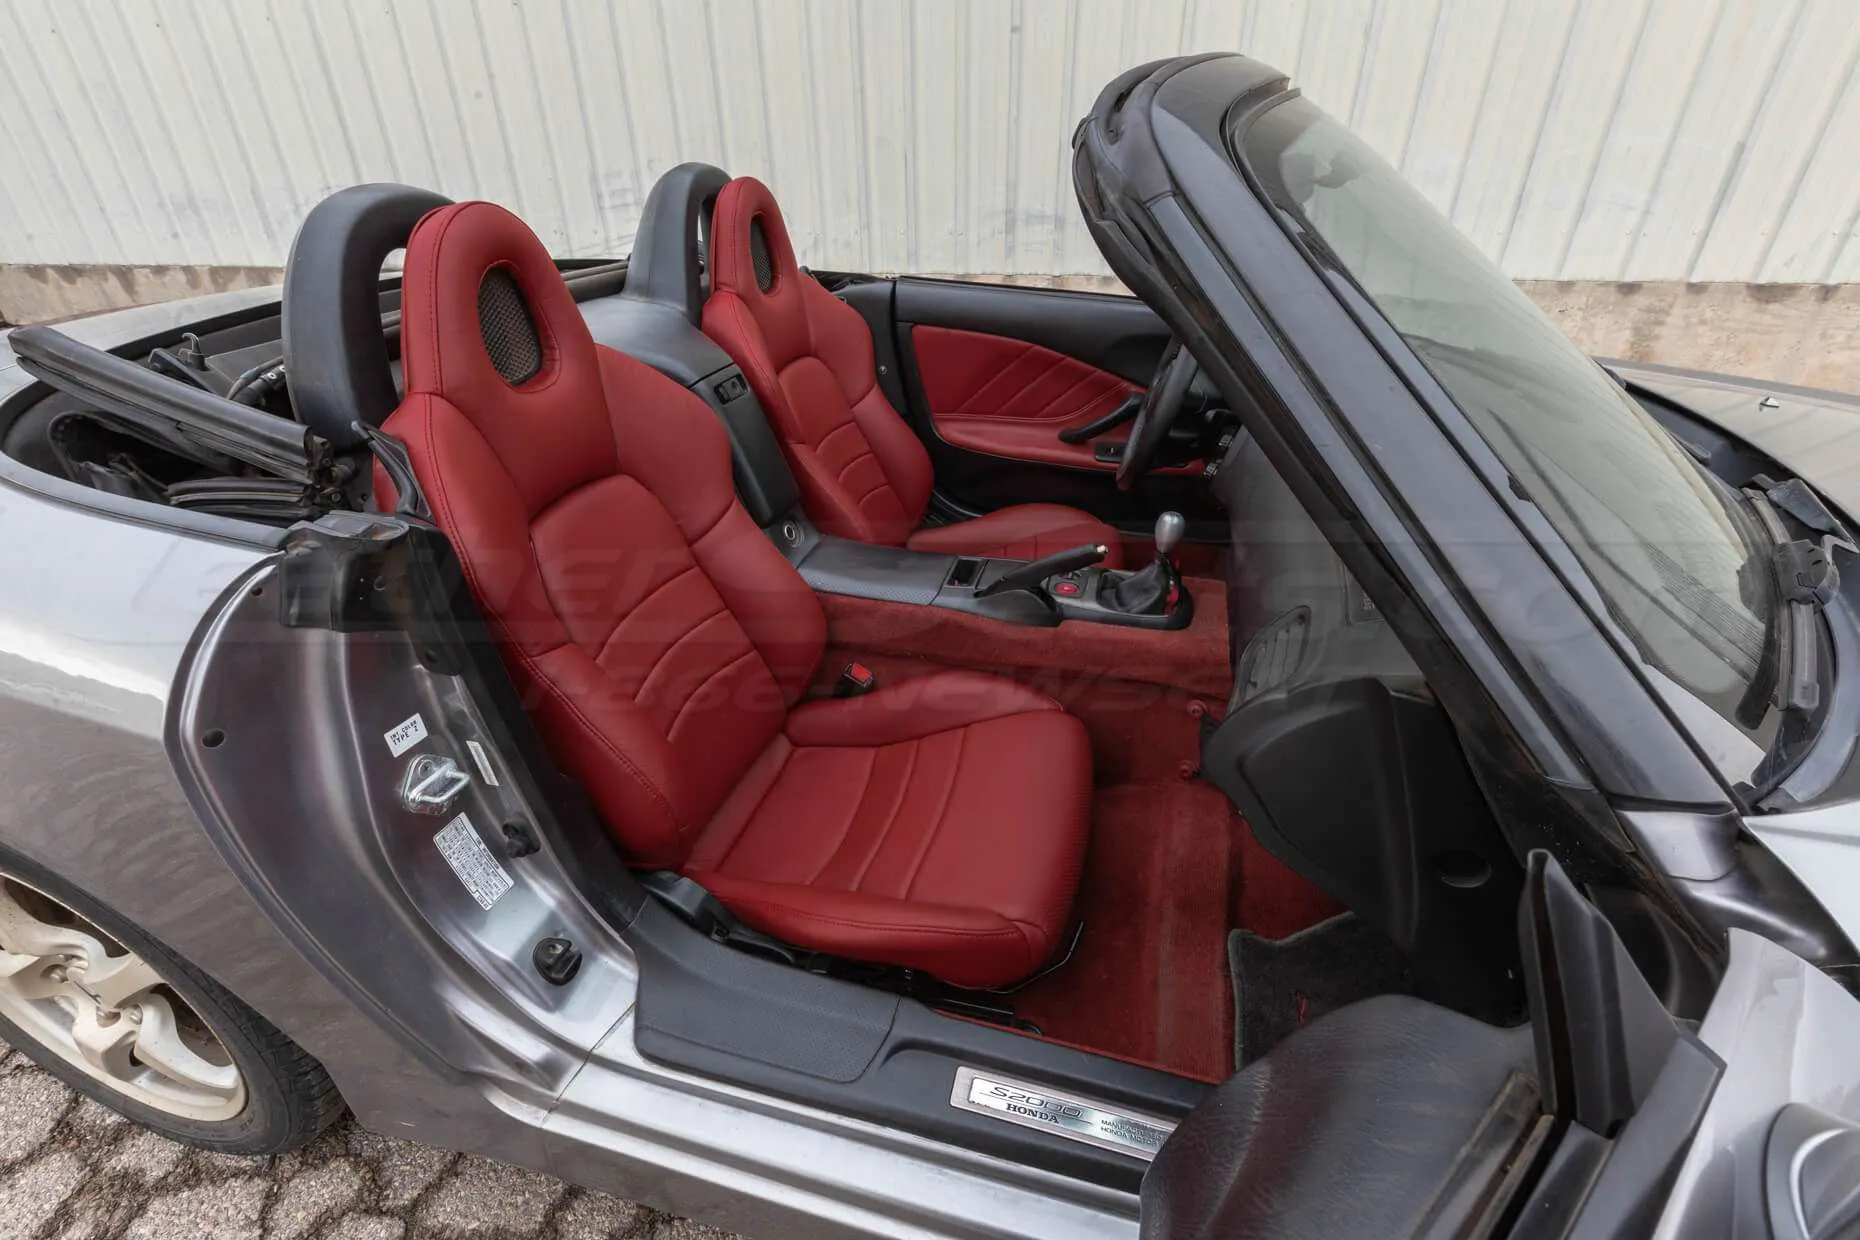 Honda S2000 Cardinal Leather Seats - Installed - Passenger side wide angle